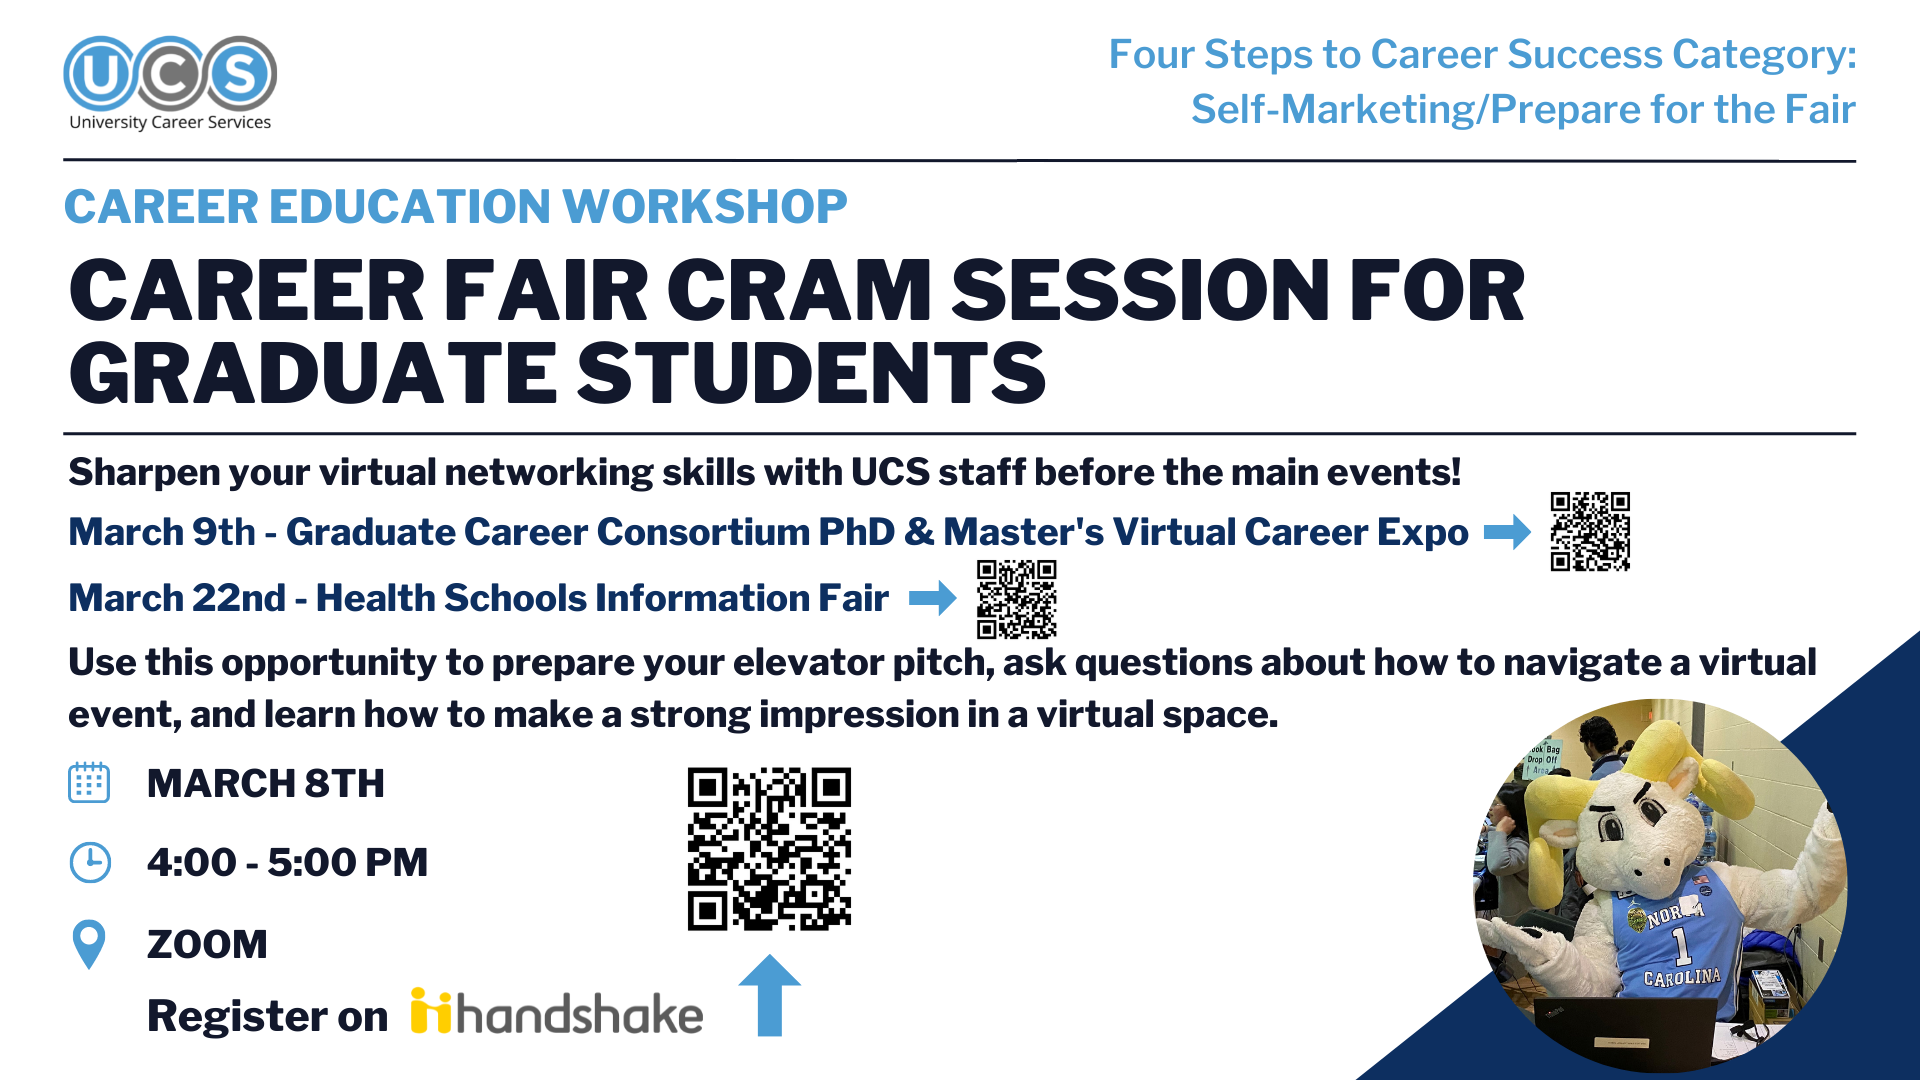 Use this opportunity to prepare your elevator pitch, ask questions about how to navigate a virtual event, and learn how to make a strong impression in a virtual space.